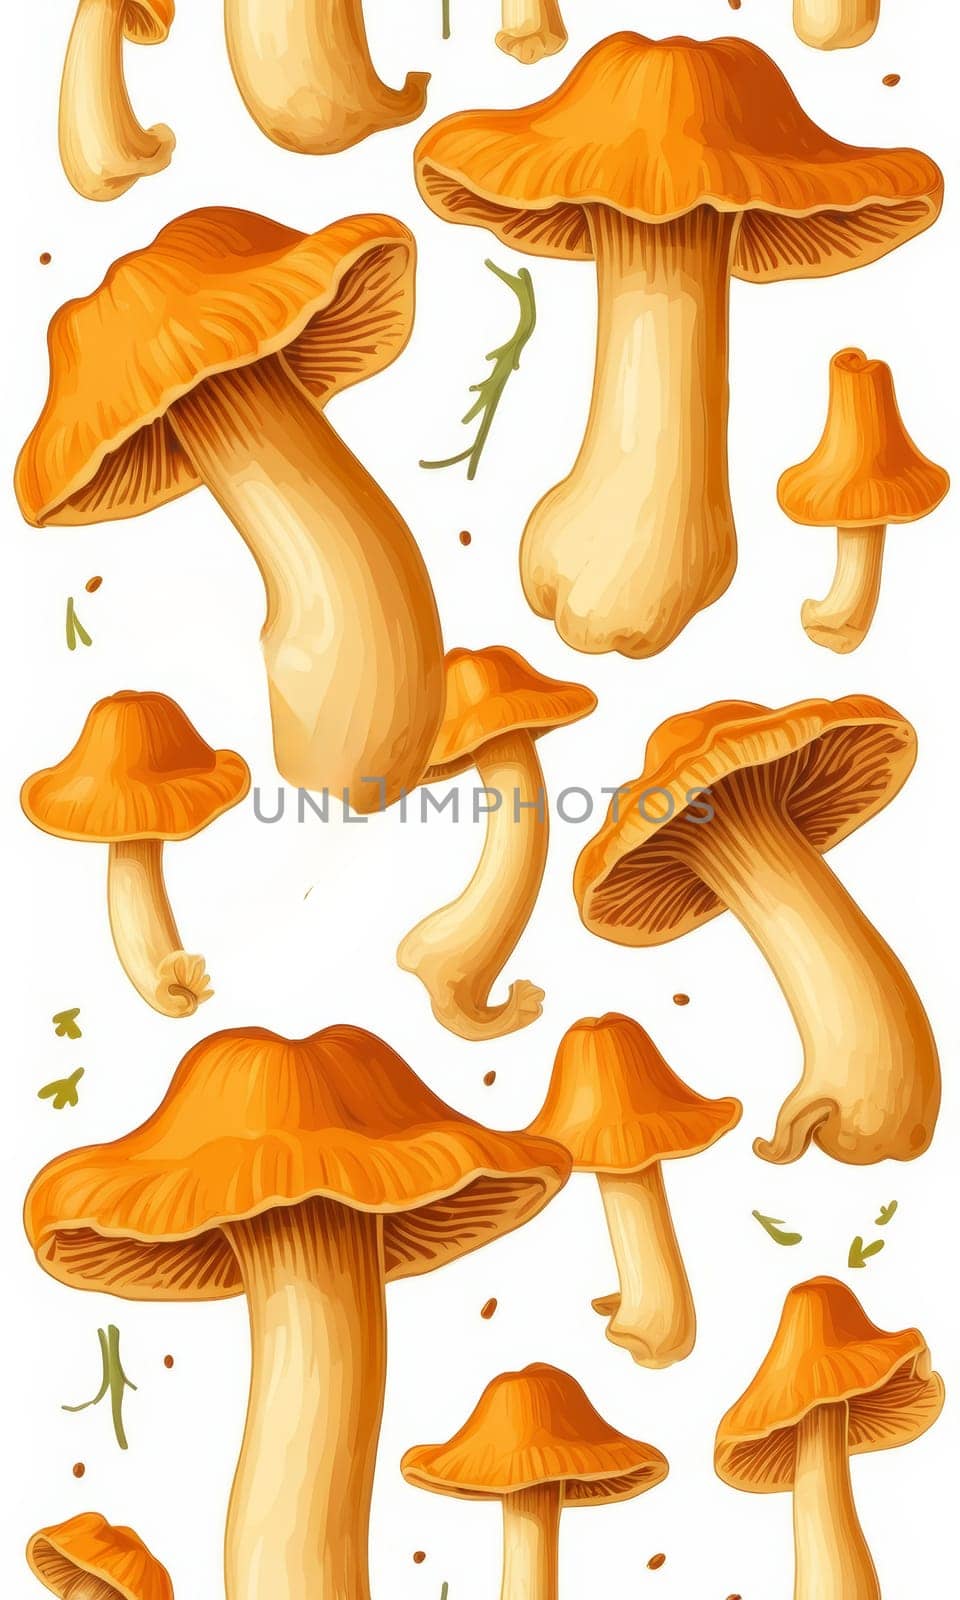 pattern with chanterelle mushrooms. illustration. by Andre1ns